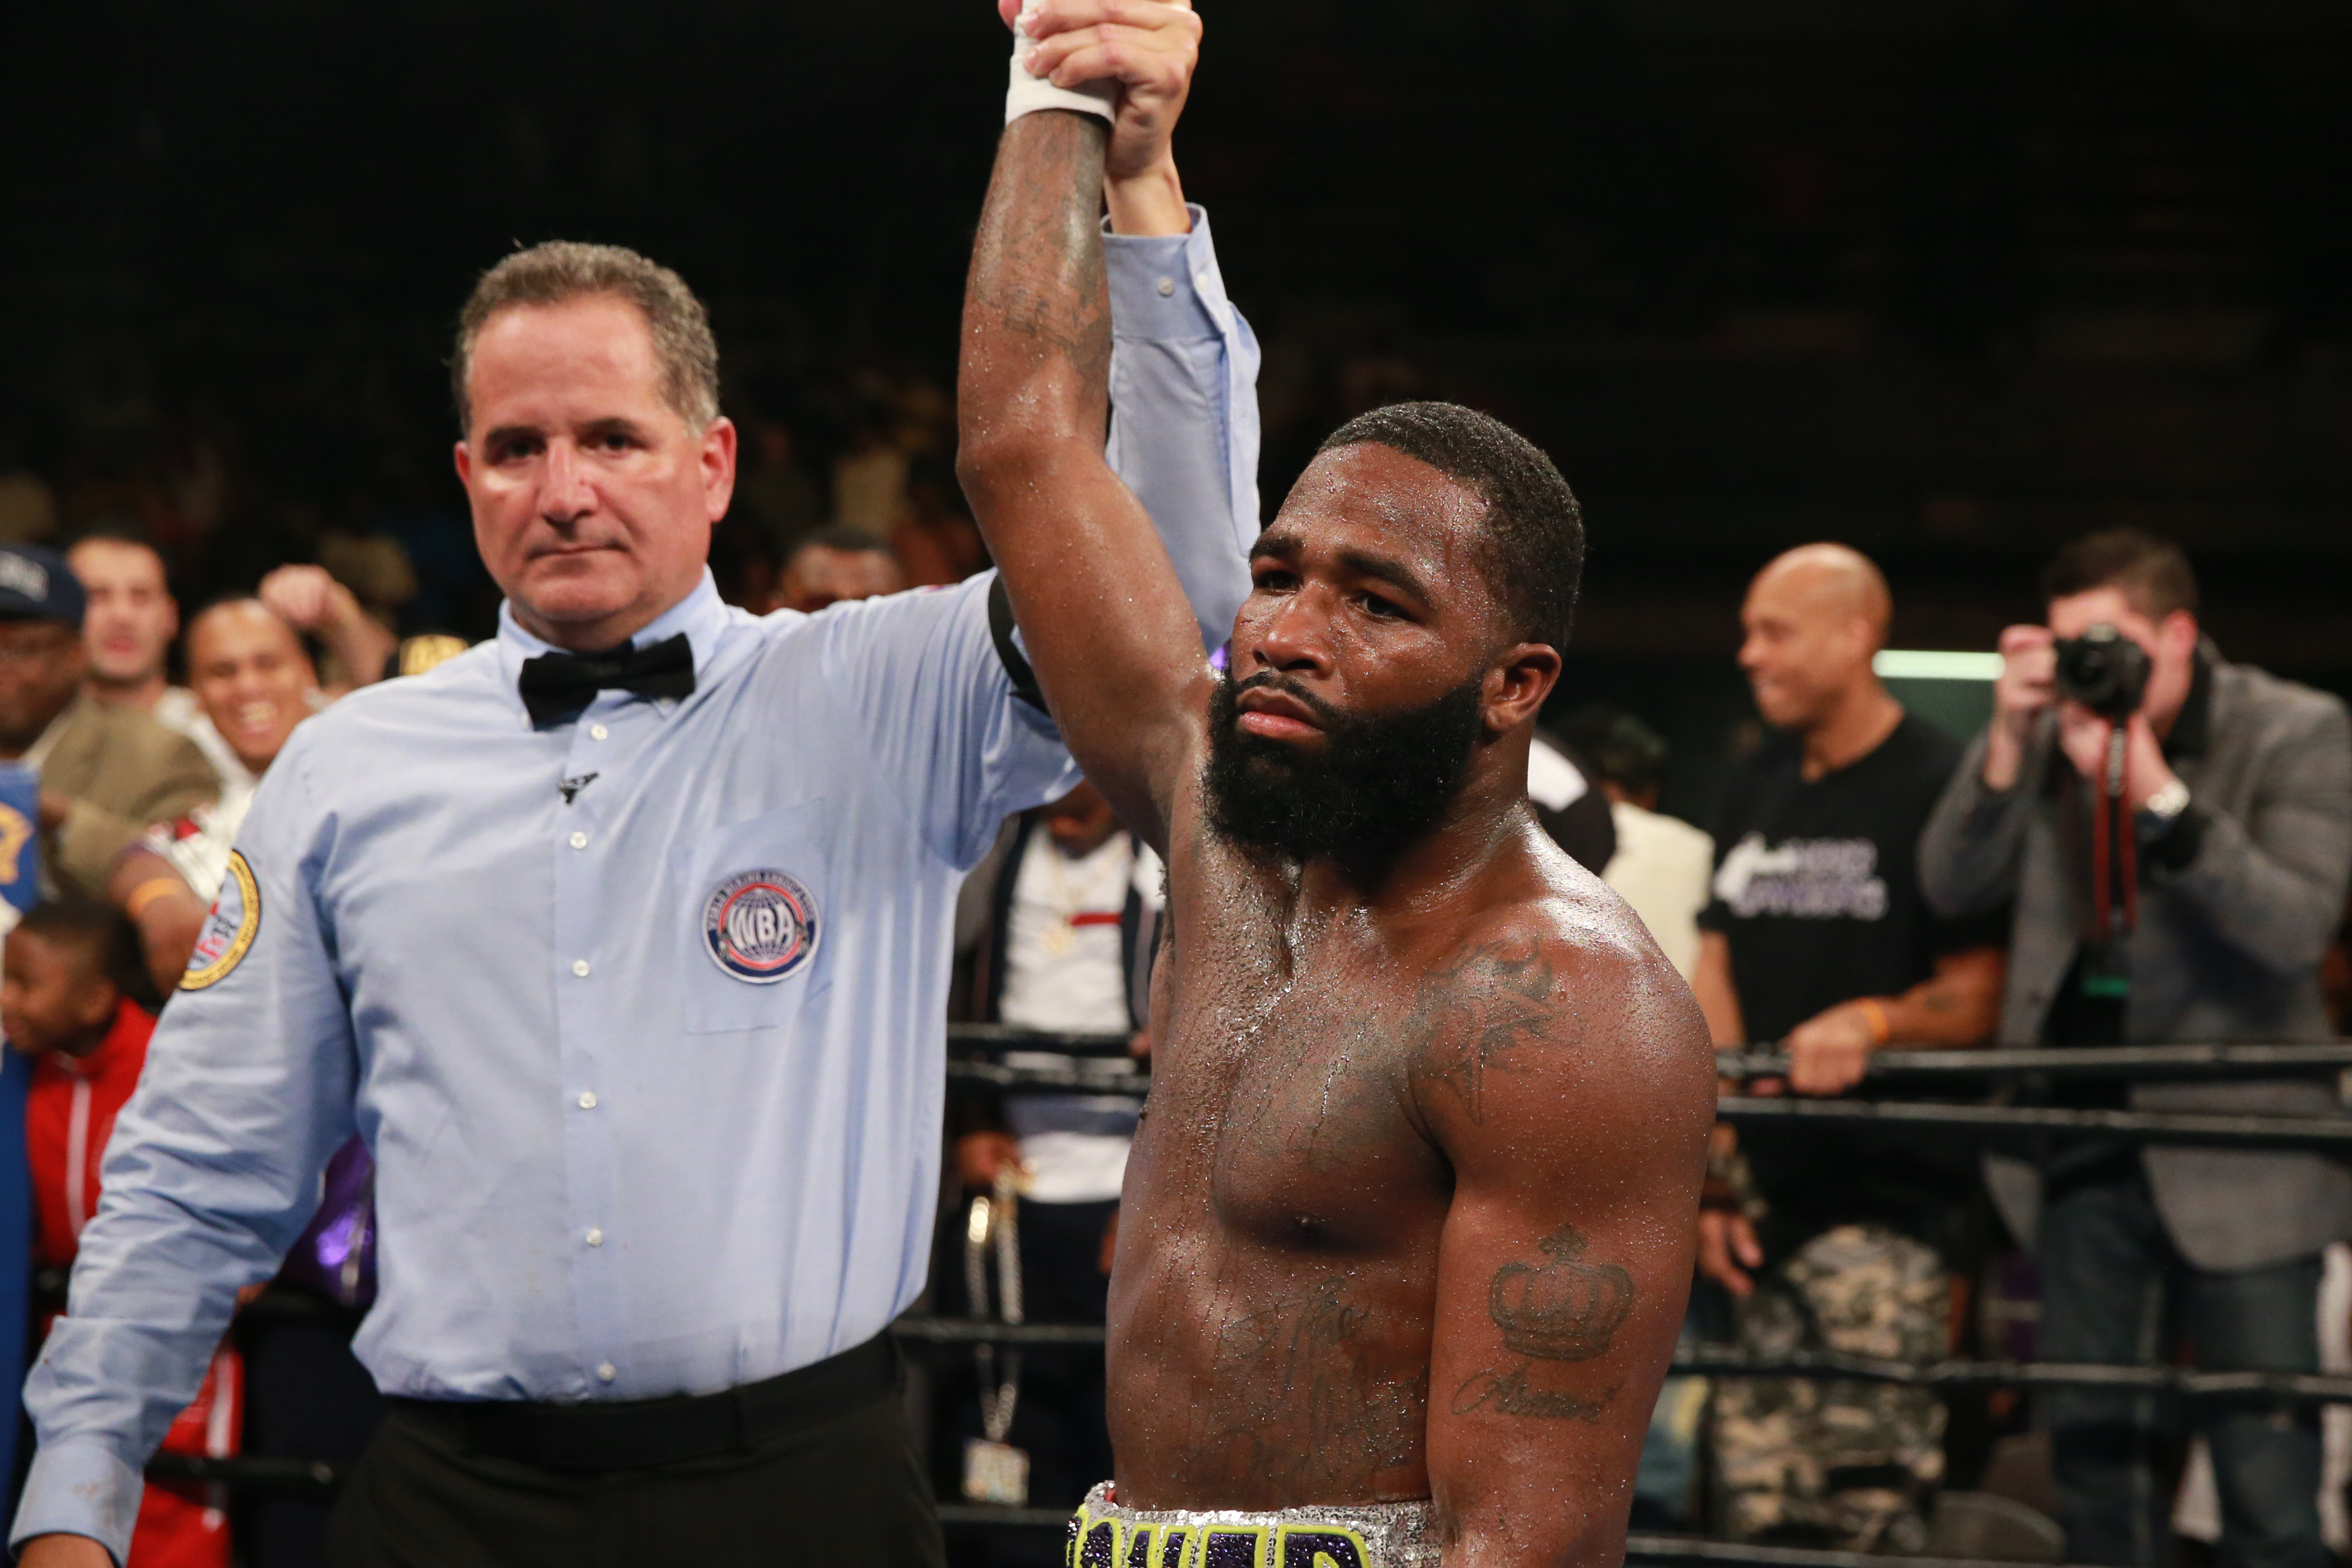 Results from DC: Adrien Broner stops Ashley Theophane in 9th round - ProBoxing-Fans.com4411 x 2941